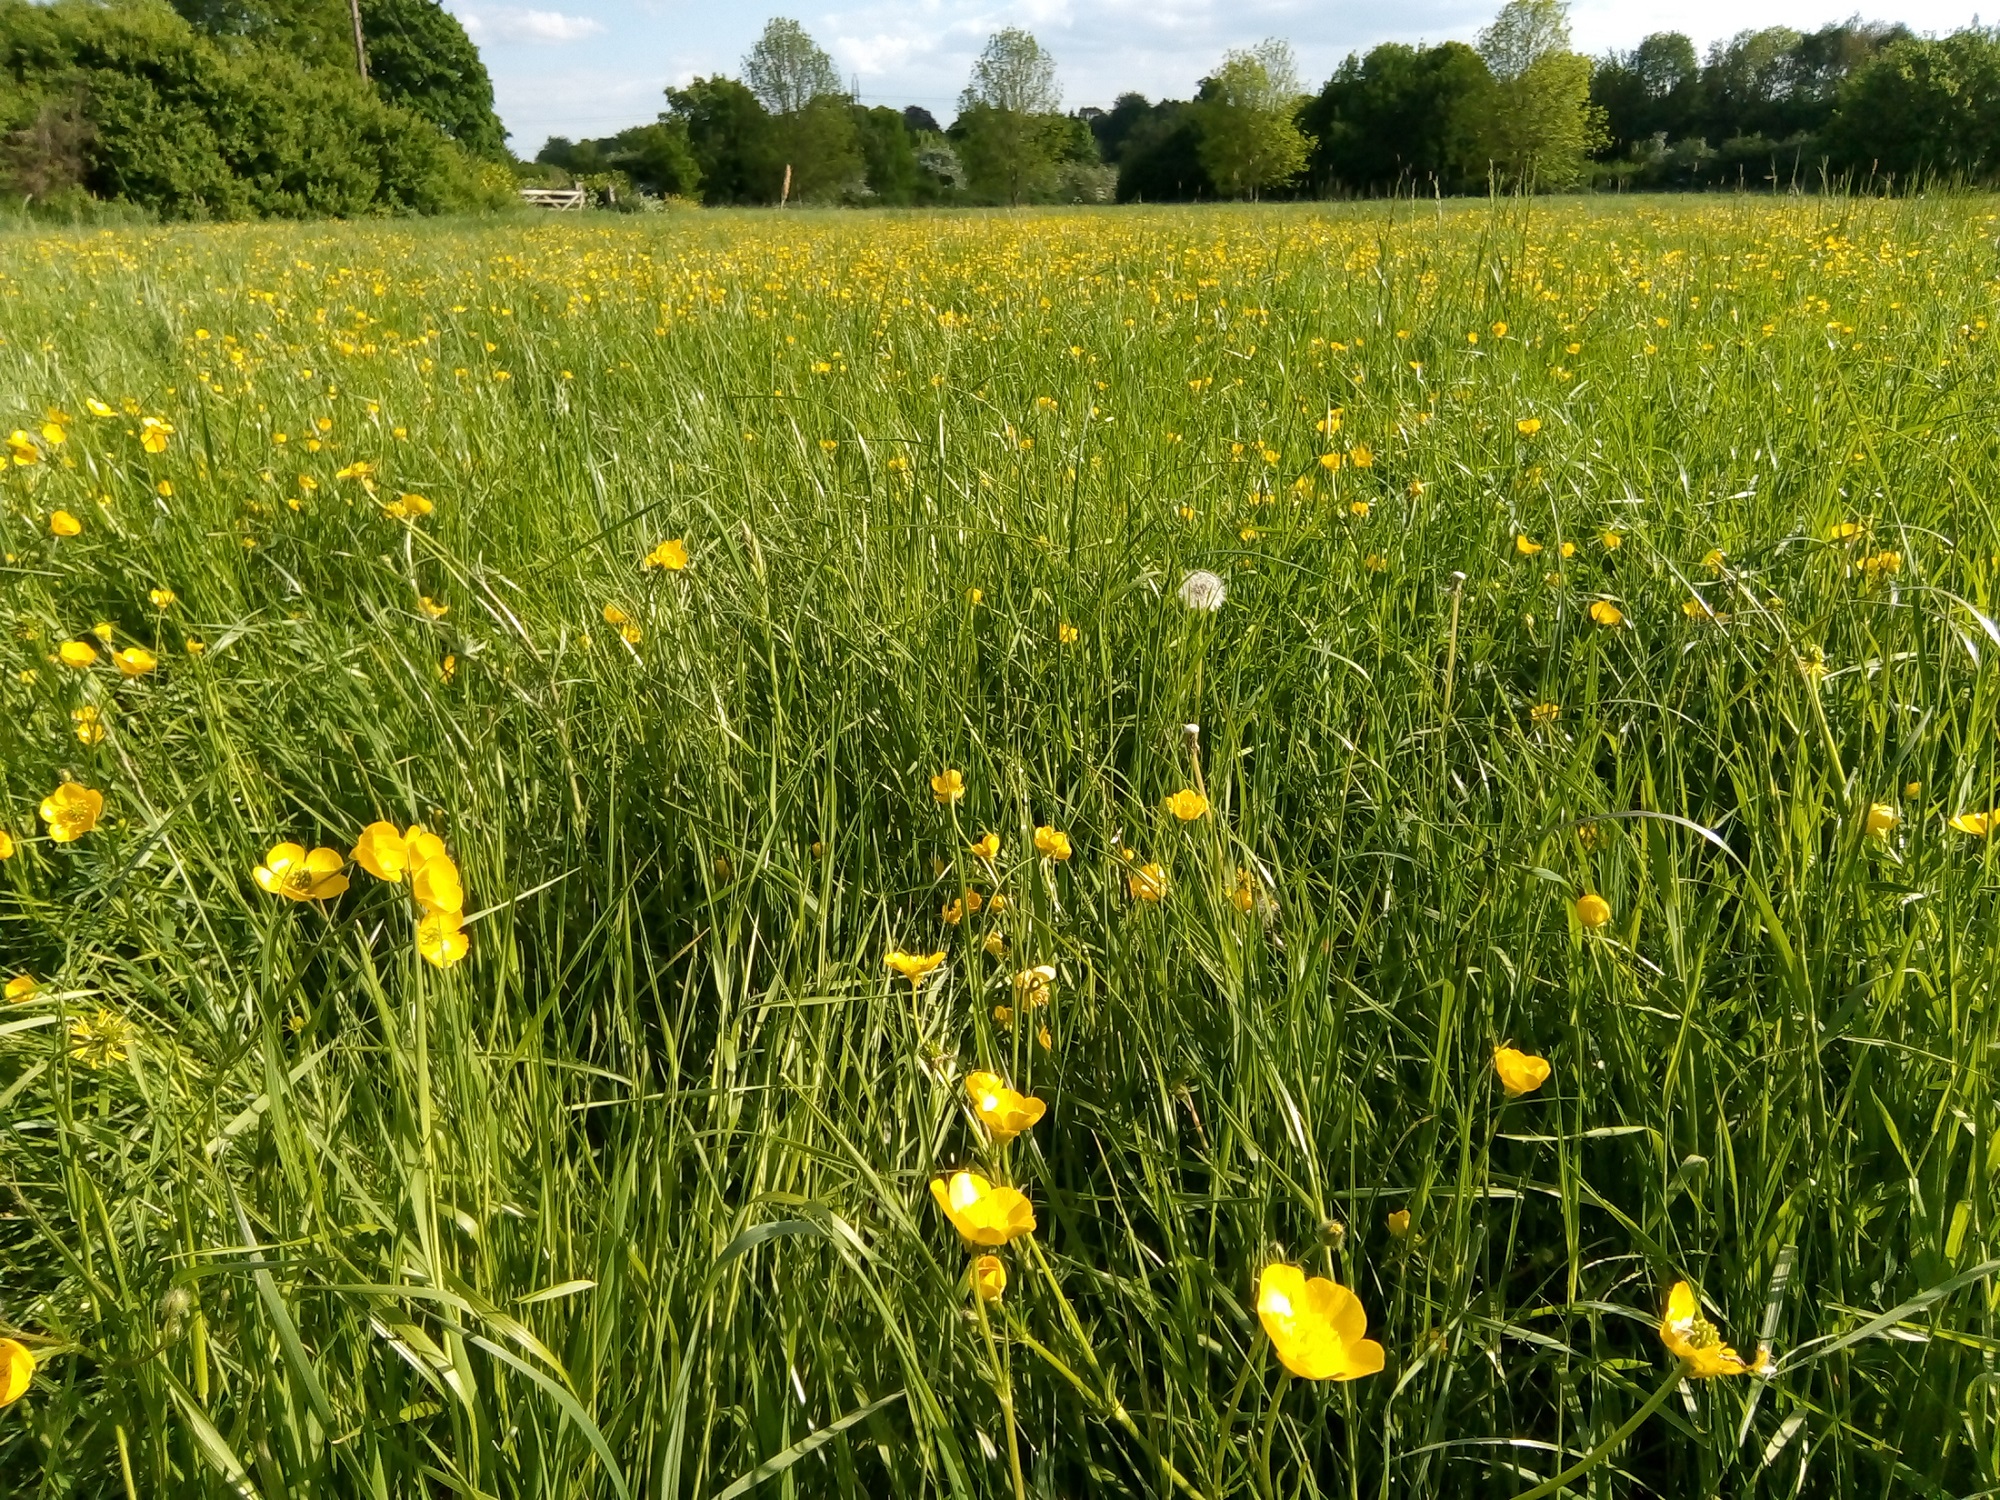 Looking across a lush early summer field yellow with buttercups on a sunny day.